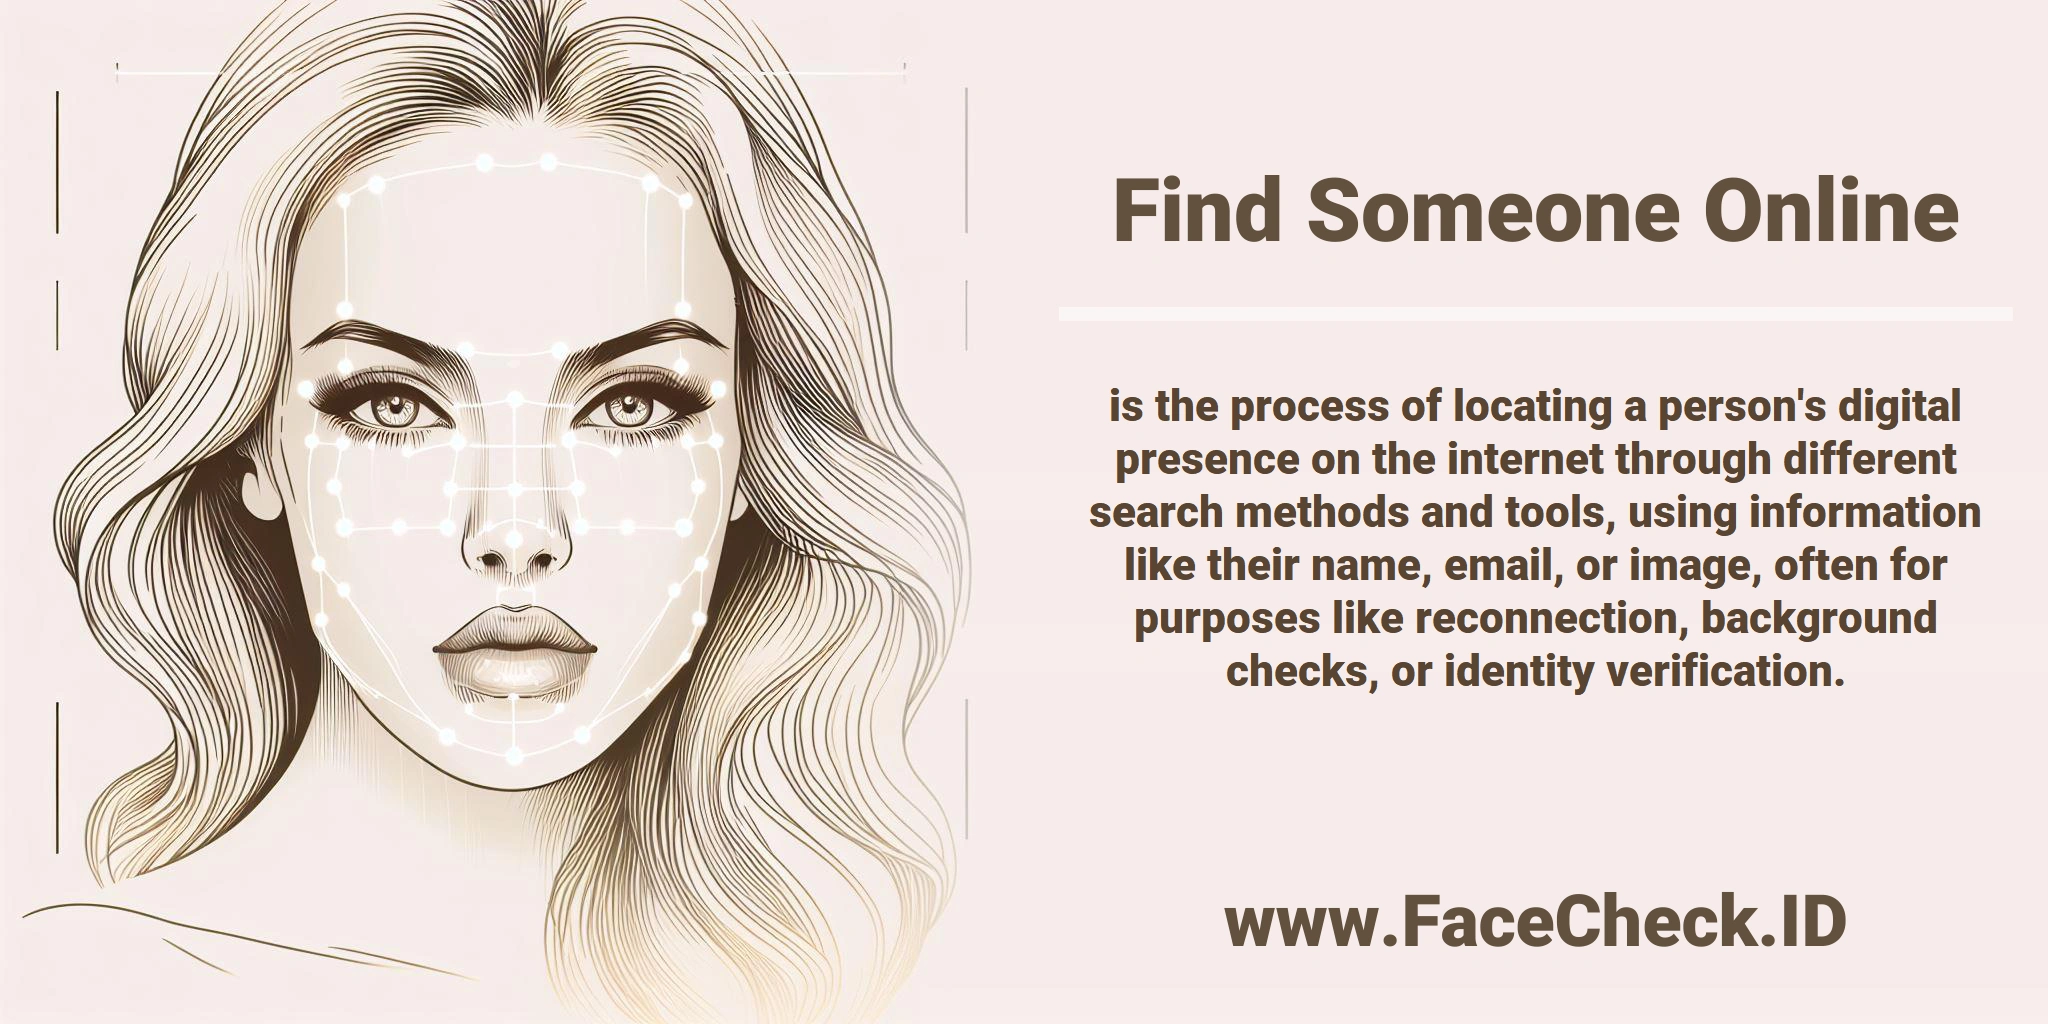 <b>Find Someone Online</b> is the process of locating a person's digital presence on the internet through different search methods and tools, using information like their name, email, or image, often for purposes like reconnection, background checks, or identity verification.